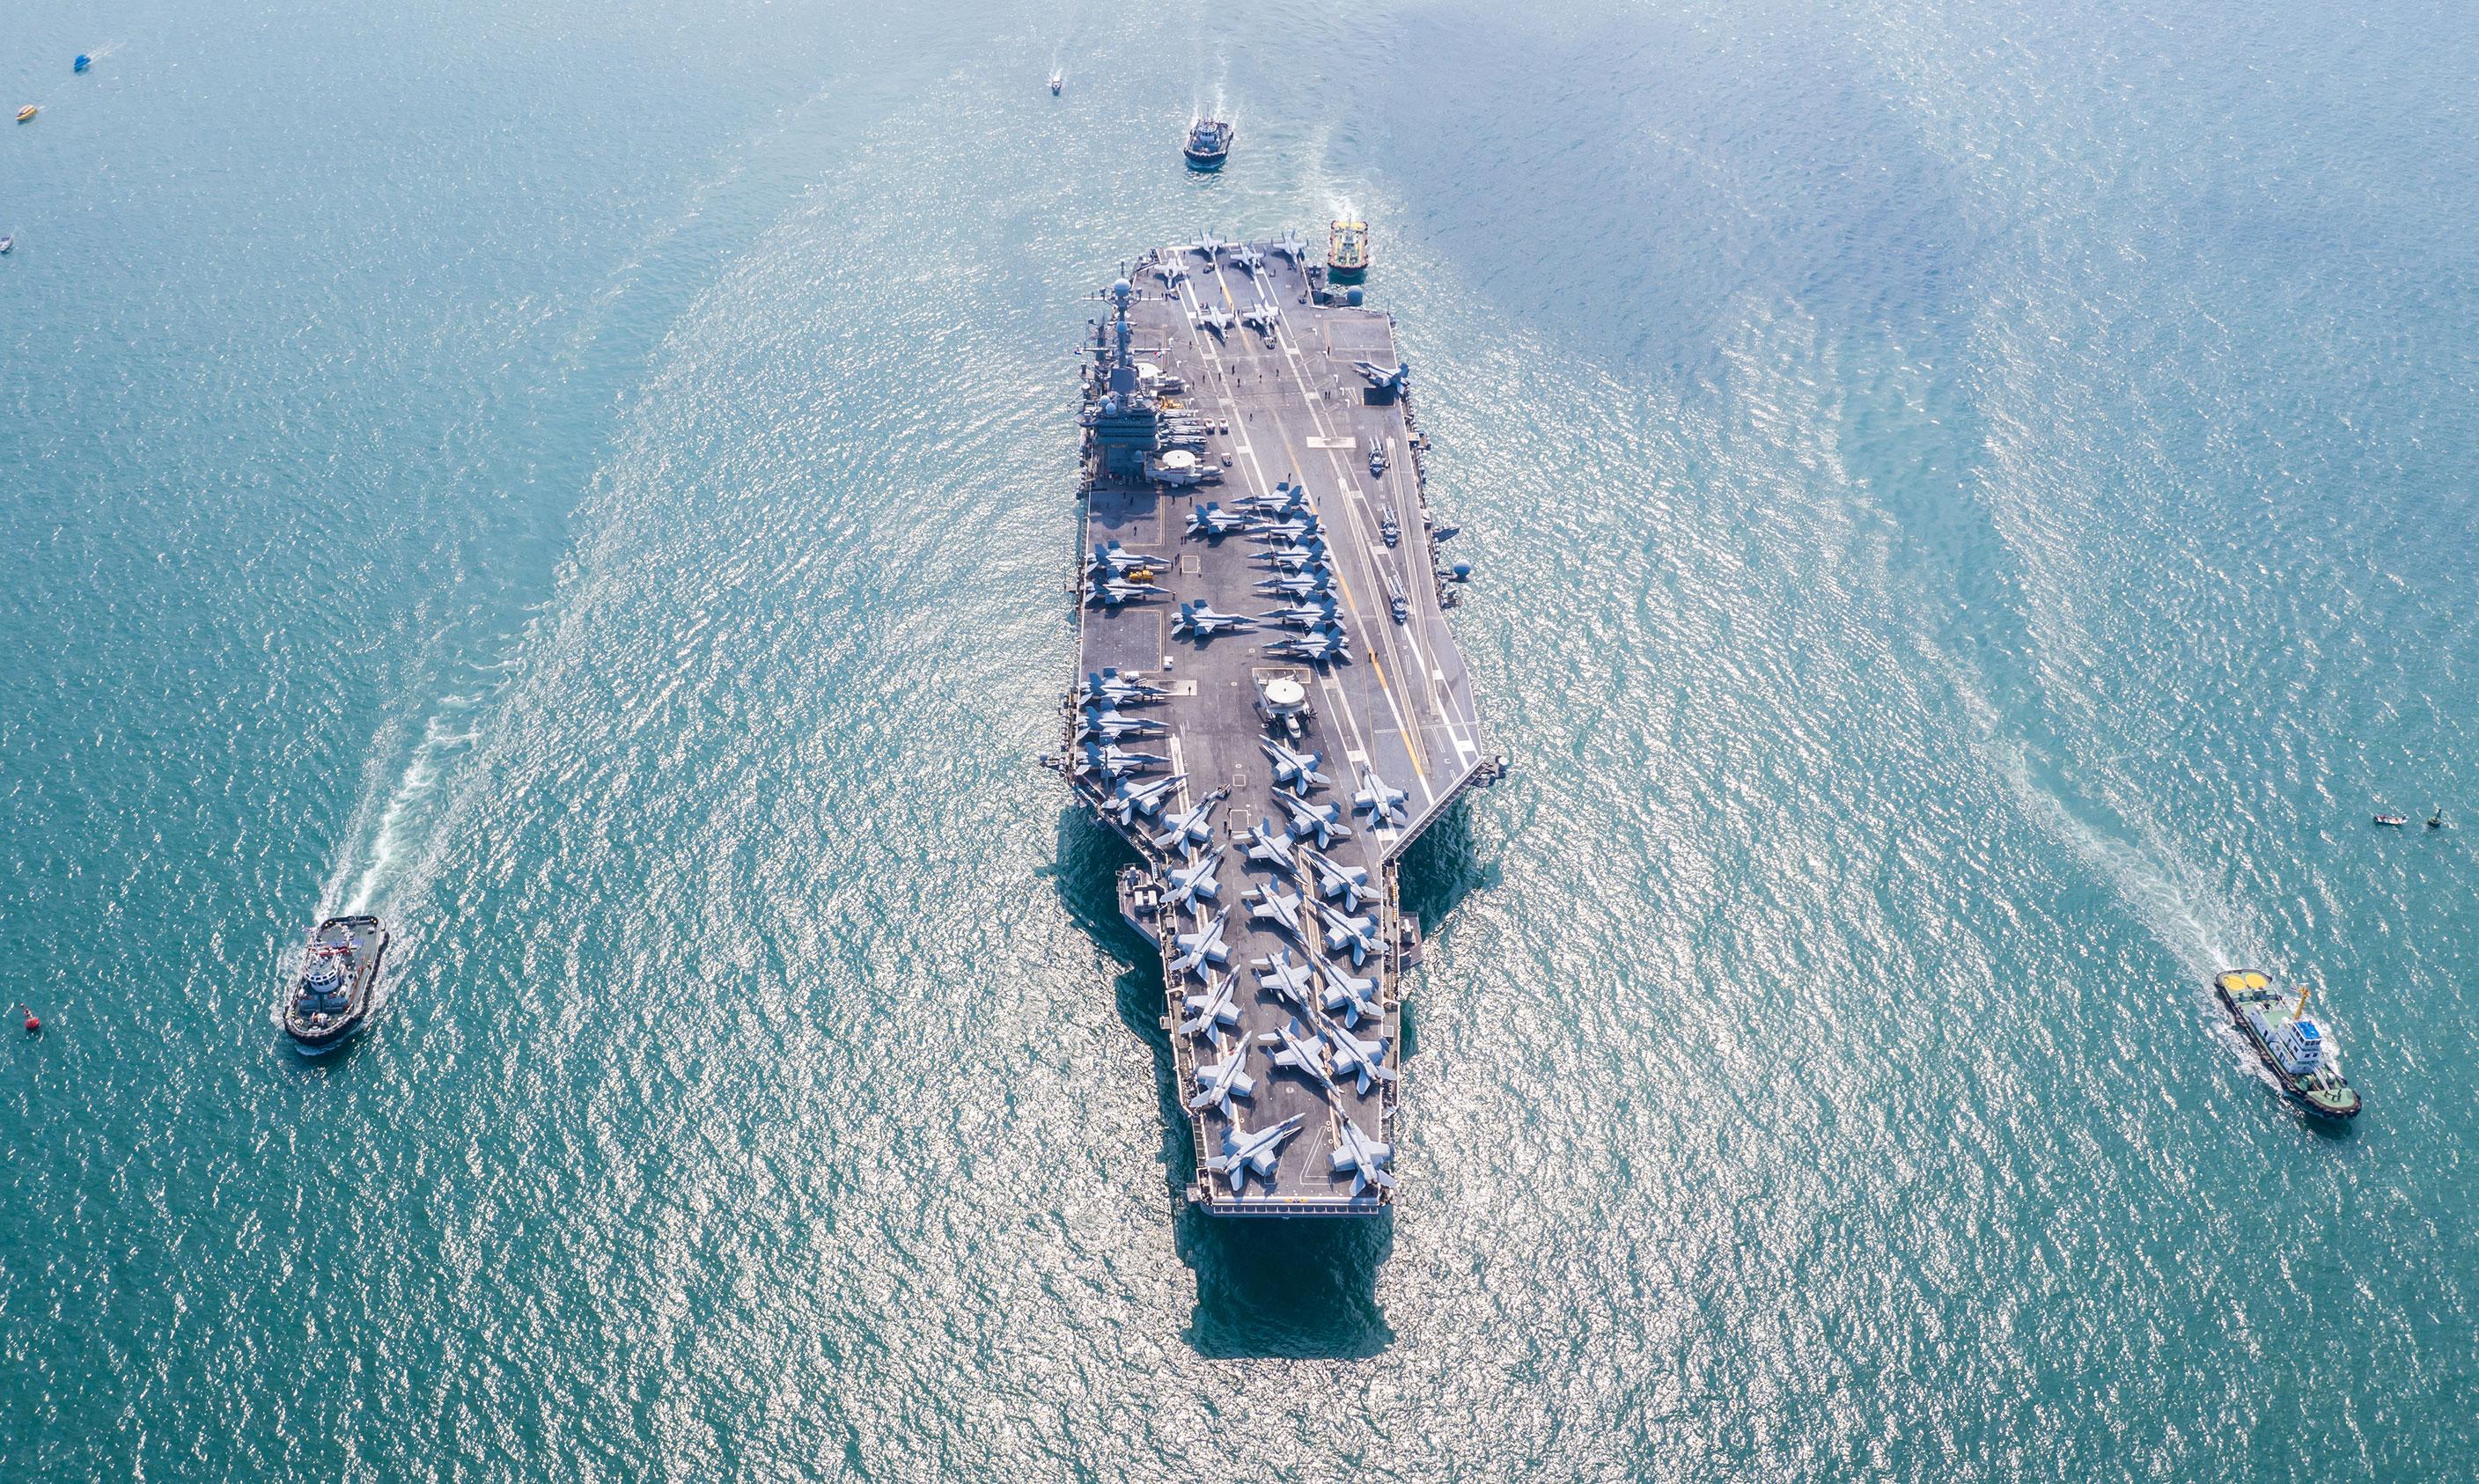 Aerial view of aircraft carrier on the ocean